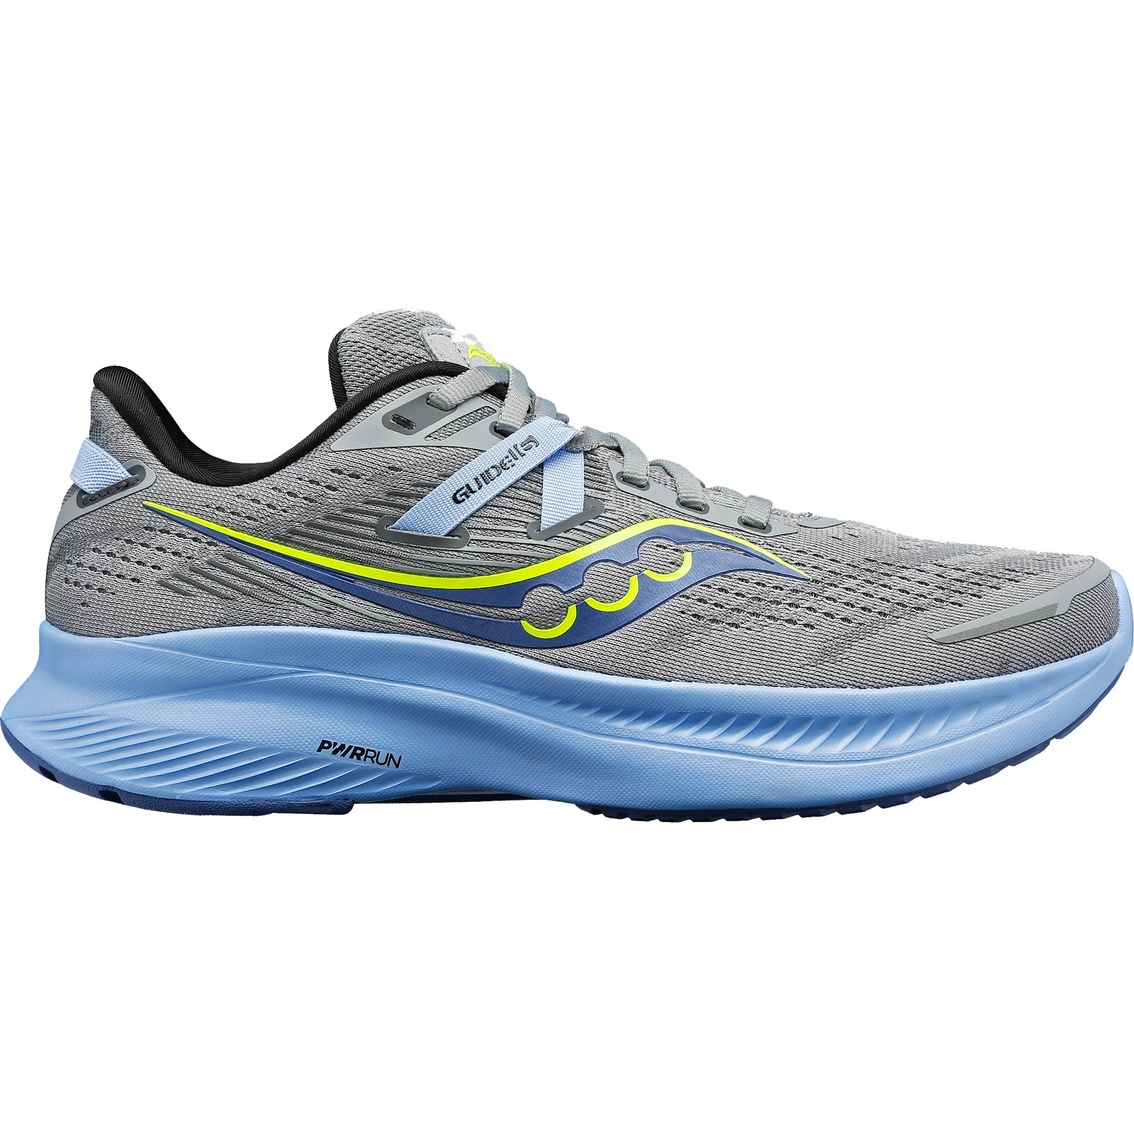 Saucony Women's Guide 16 Running Shoes - Image 2 of 5